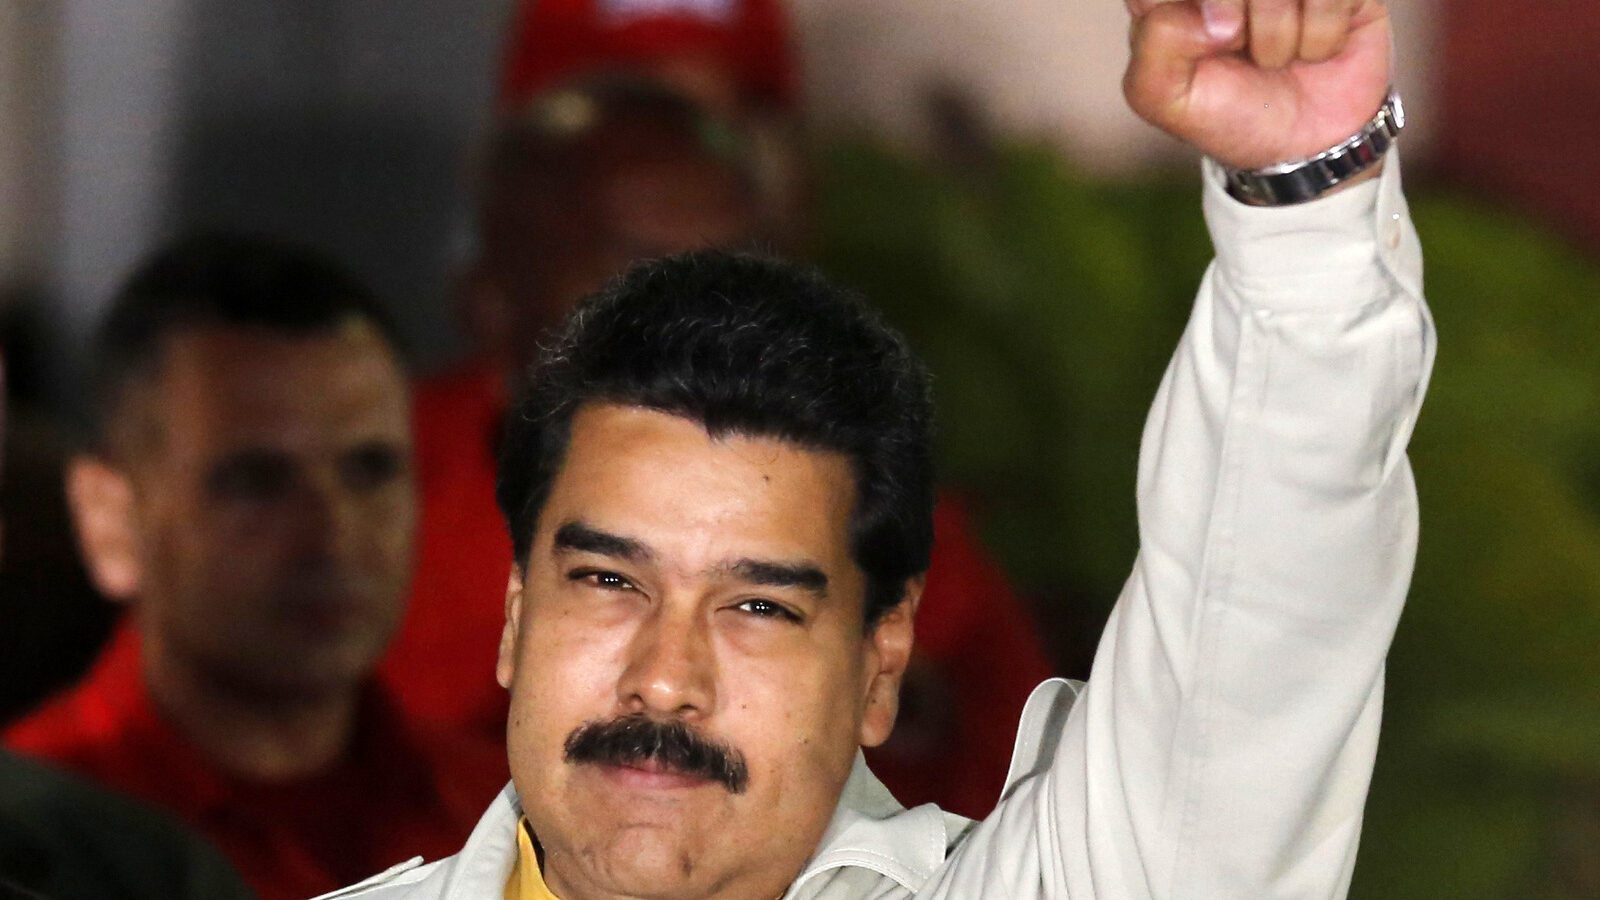 Venezuela's President Nicolas Maduro holds up a clenched fist as he greets supporters during an event at Miraflores presidential palace in Caracas, Venezuela. In a fiery speech late Monday, March 9, 2015.